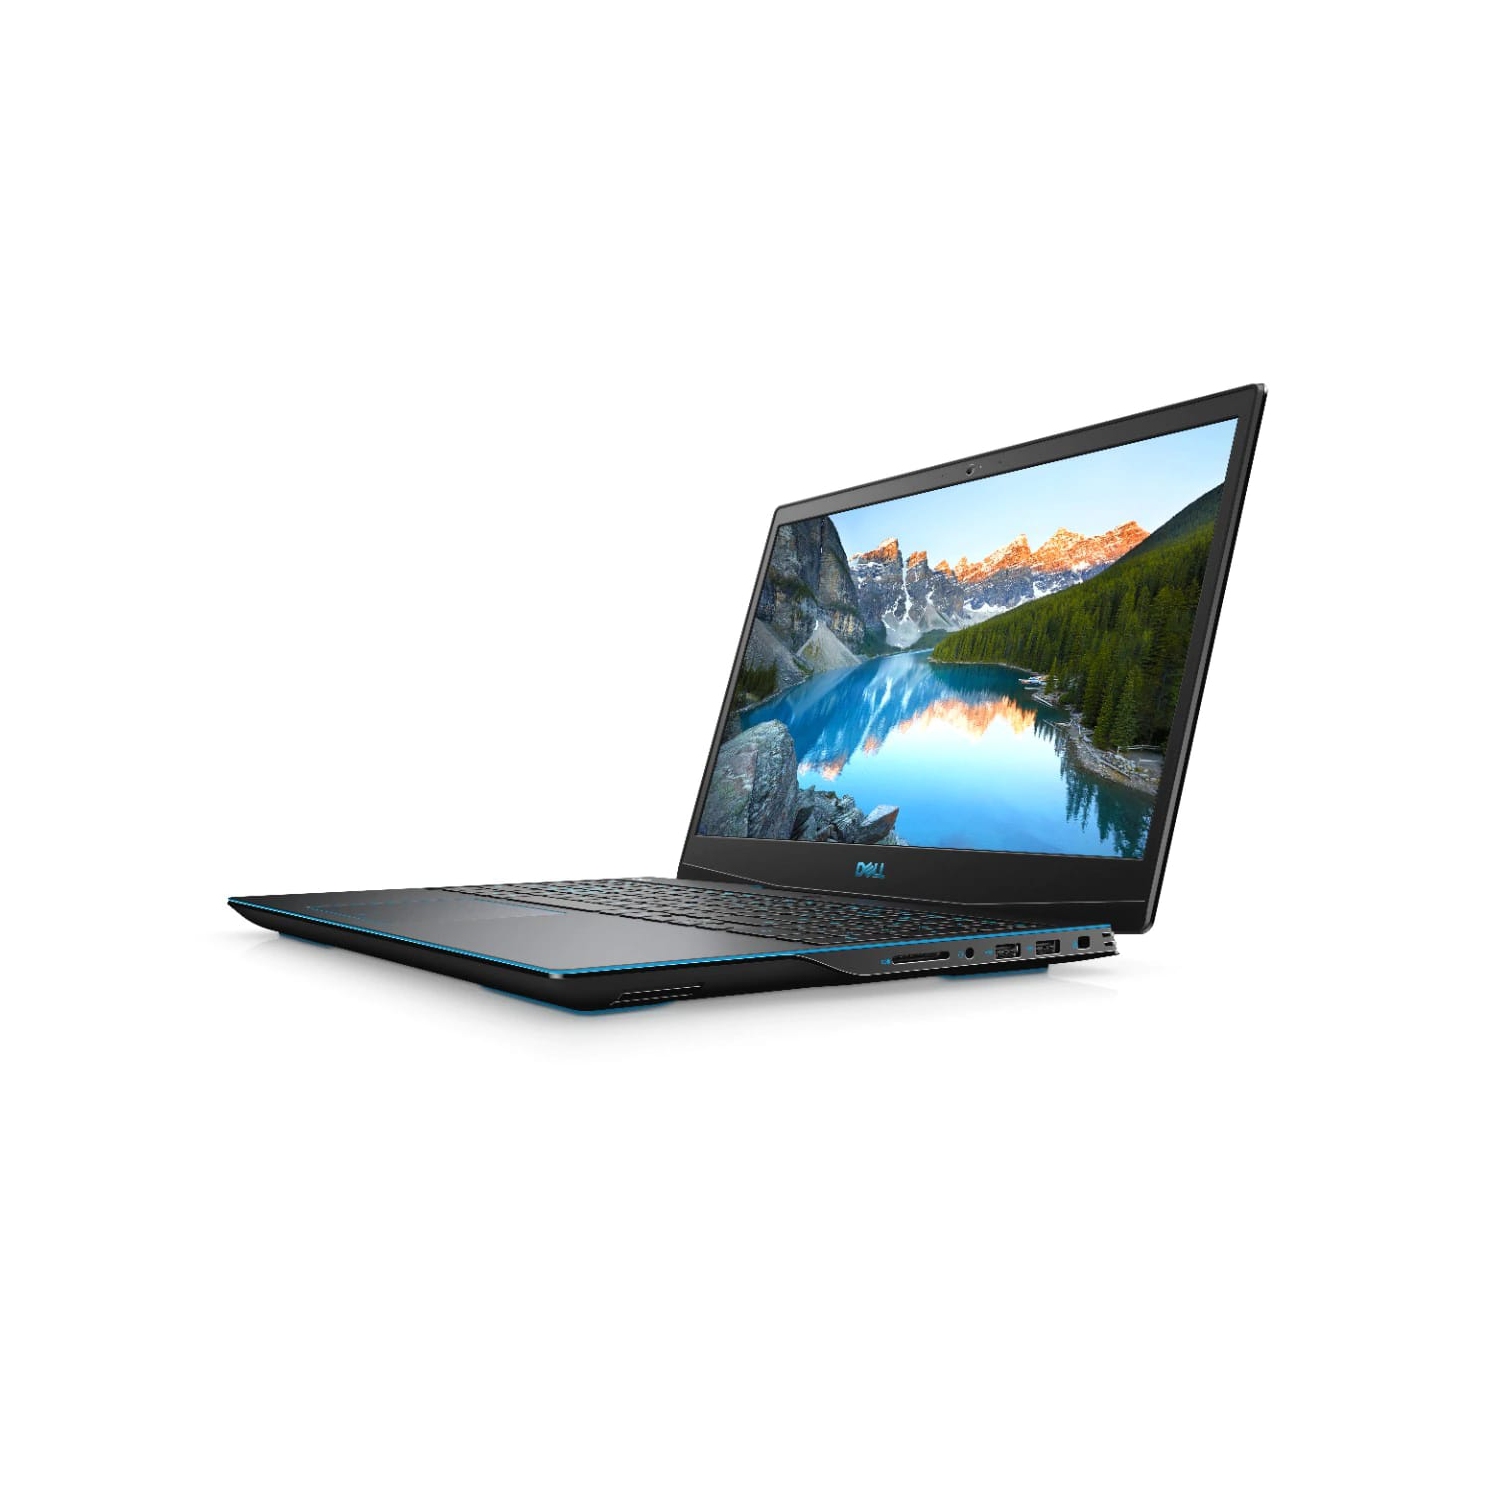 Refurbished (Excellent) – Dell G3 3500 Gaming Laptop (2020) | 15.6" FHD | Core i7 - 1TB SSD - 16GB RAM | 6 Cores @ 5 GHz - 10th Gen CPU